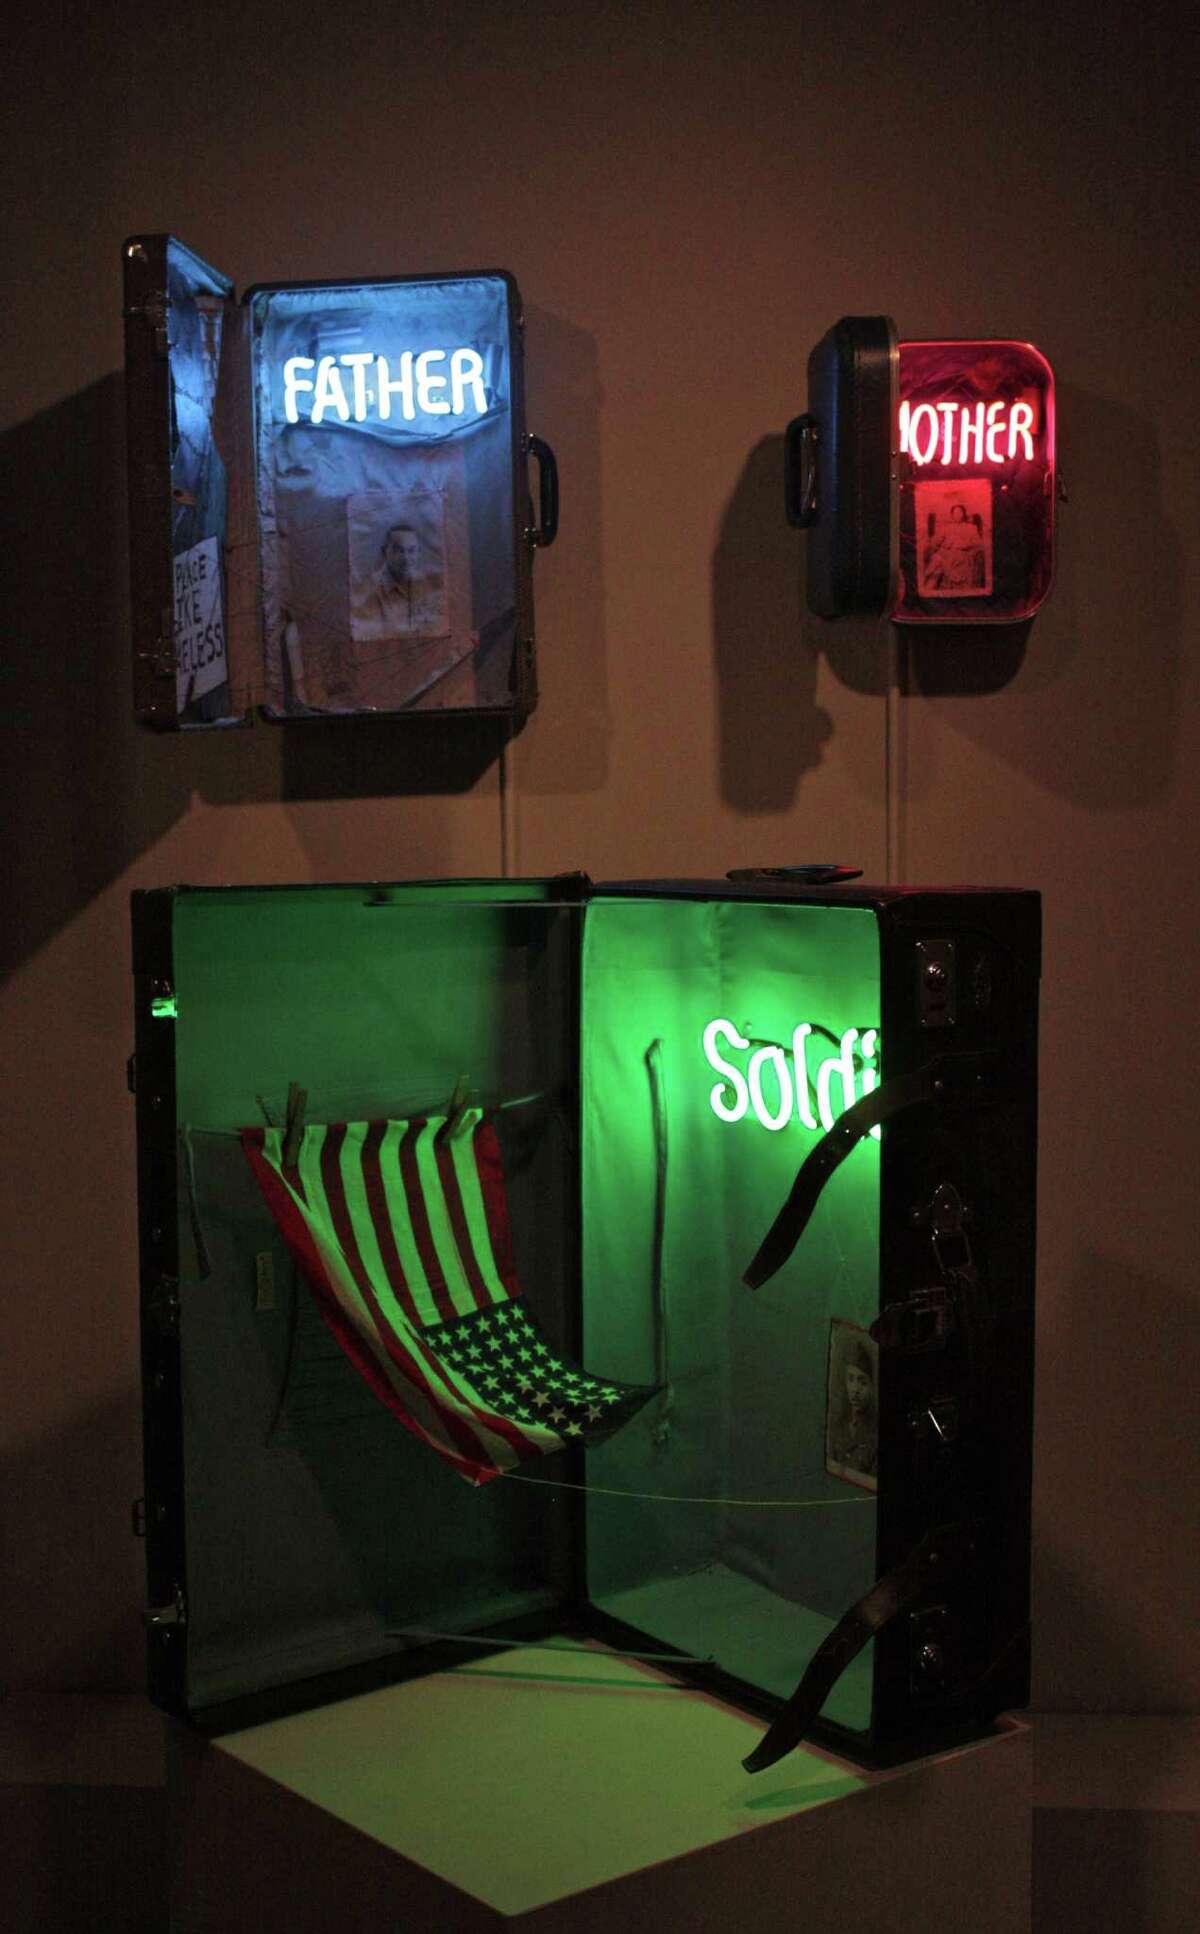 thacher 11 jpeg 3: William Rhodes' works "Patron Saint of Lost Causes," "Our Mother of Perpetual Lost Homes" and "Guardian of Forgotten Actions," made of suitcases neon glass, paint, thread and photographs, are on view at the Thacher Gallery. Courtesy Thacher Gallery.